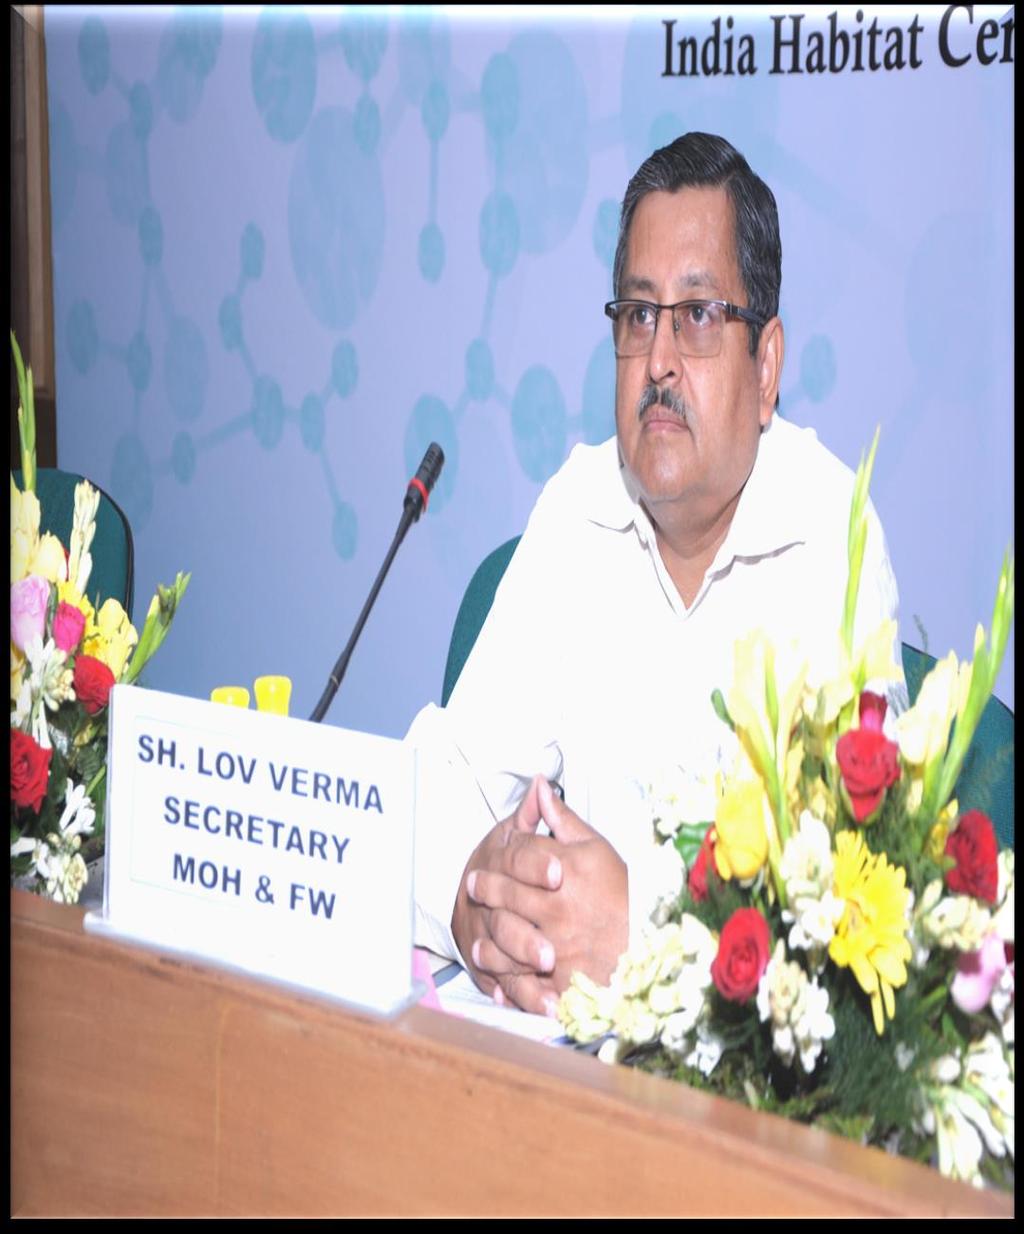 Mr. Lov Verma, Secretary, Ministry of Health & Family Welfare addressed the participants in the closing day of the three days workshop expressing the views and intension